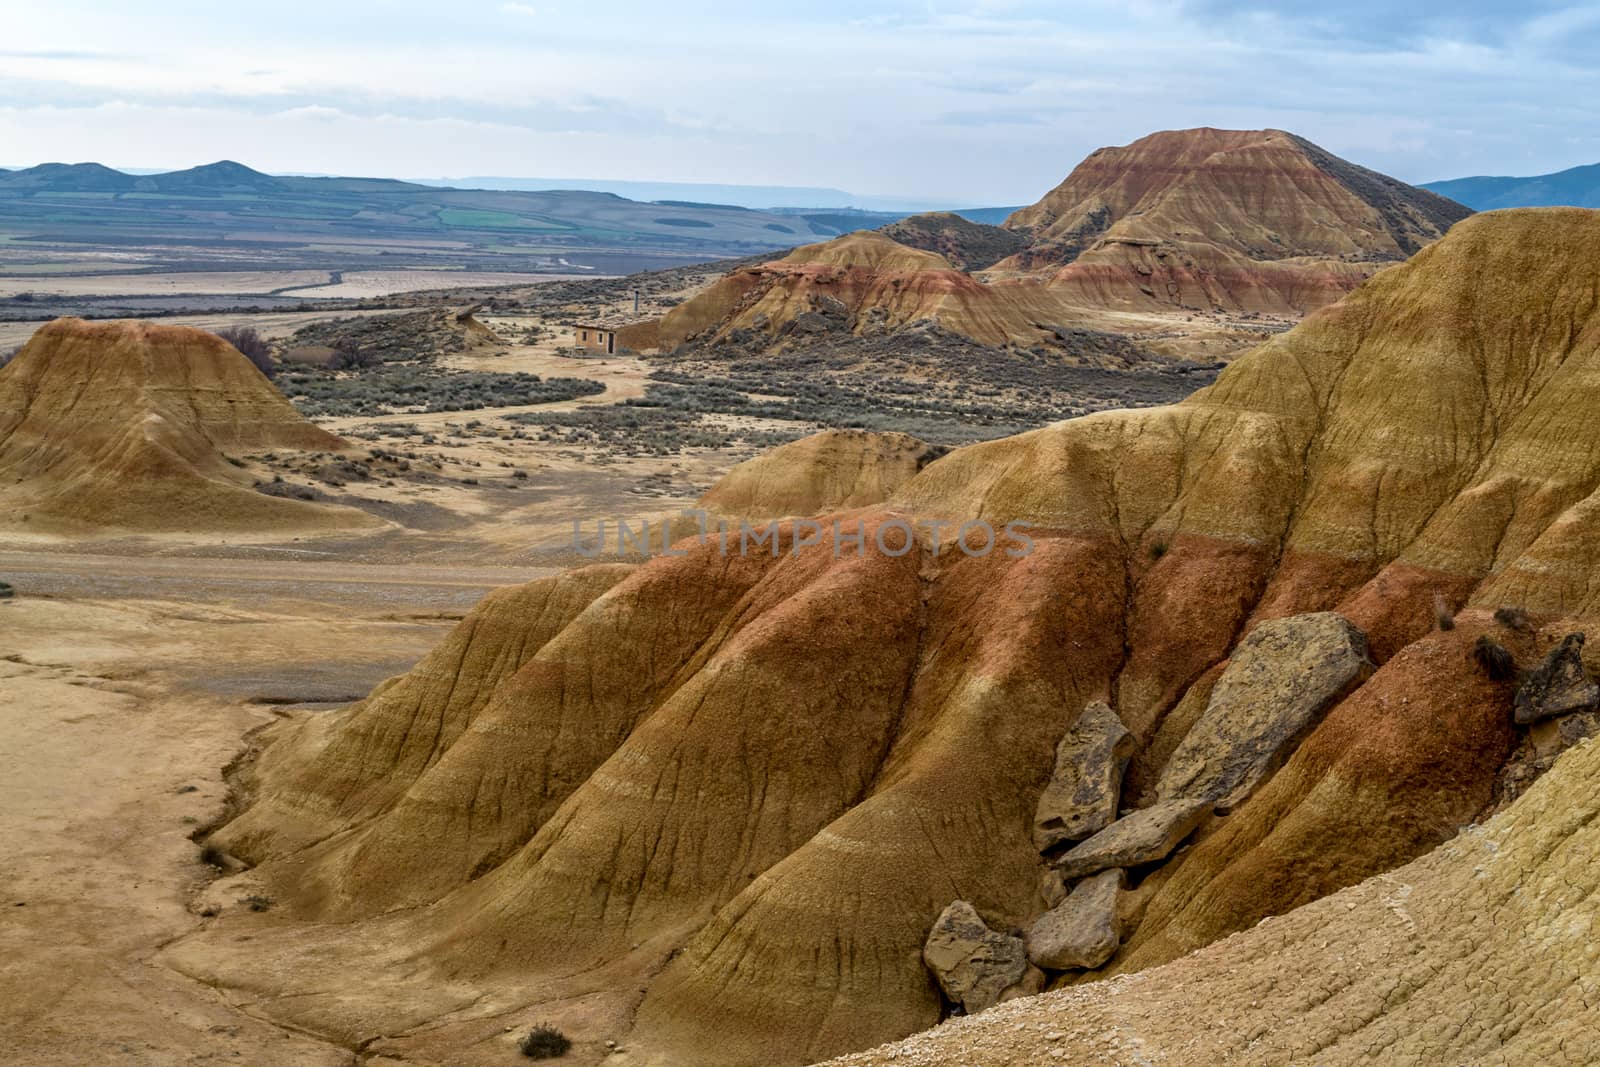 Erosion in Bardenas Reales by rmbarricarte